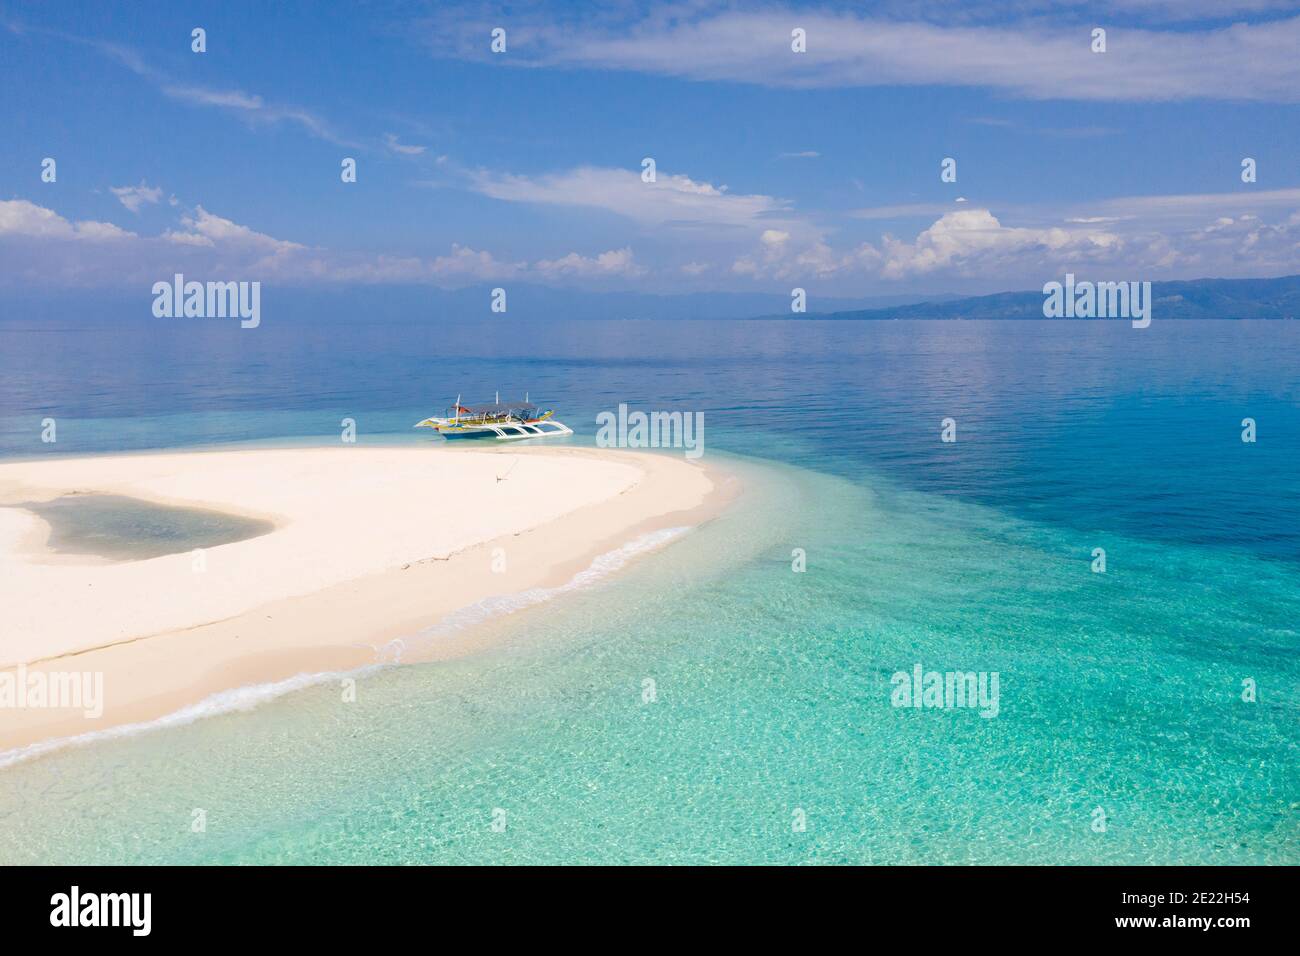 Tranquil beach scenery. Exotic tropical beach landscape with white sand beach and amazing turquoise sea. Digyo Island, Philippines. Stock Photo